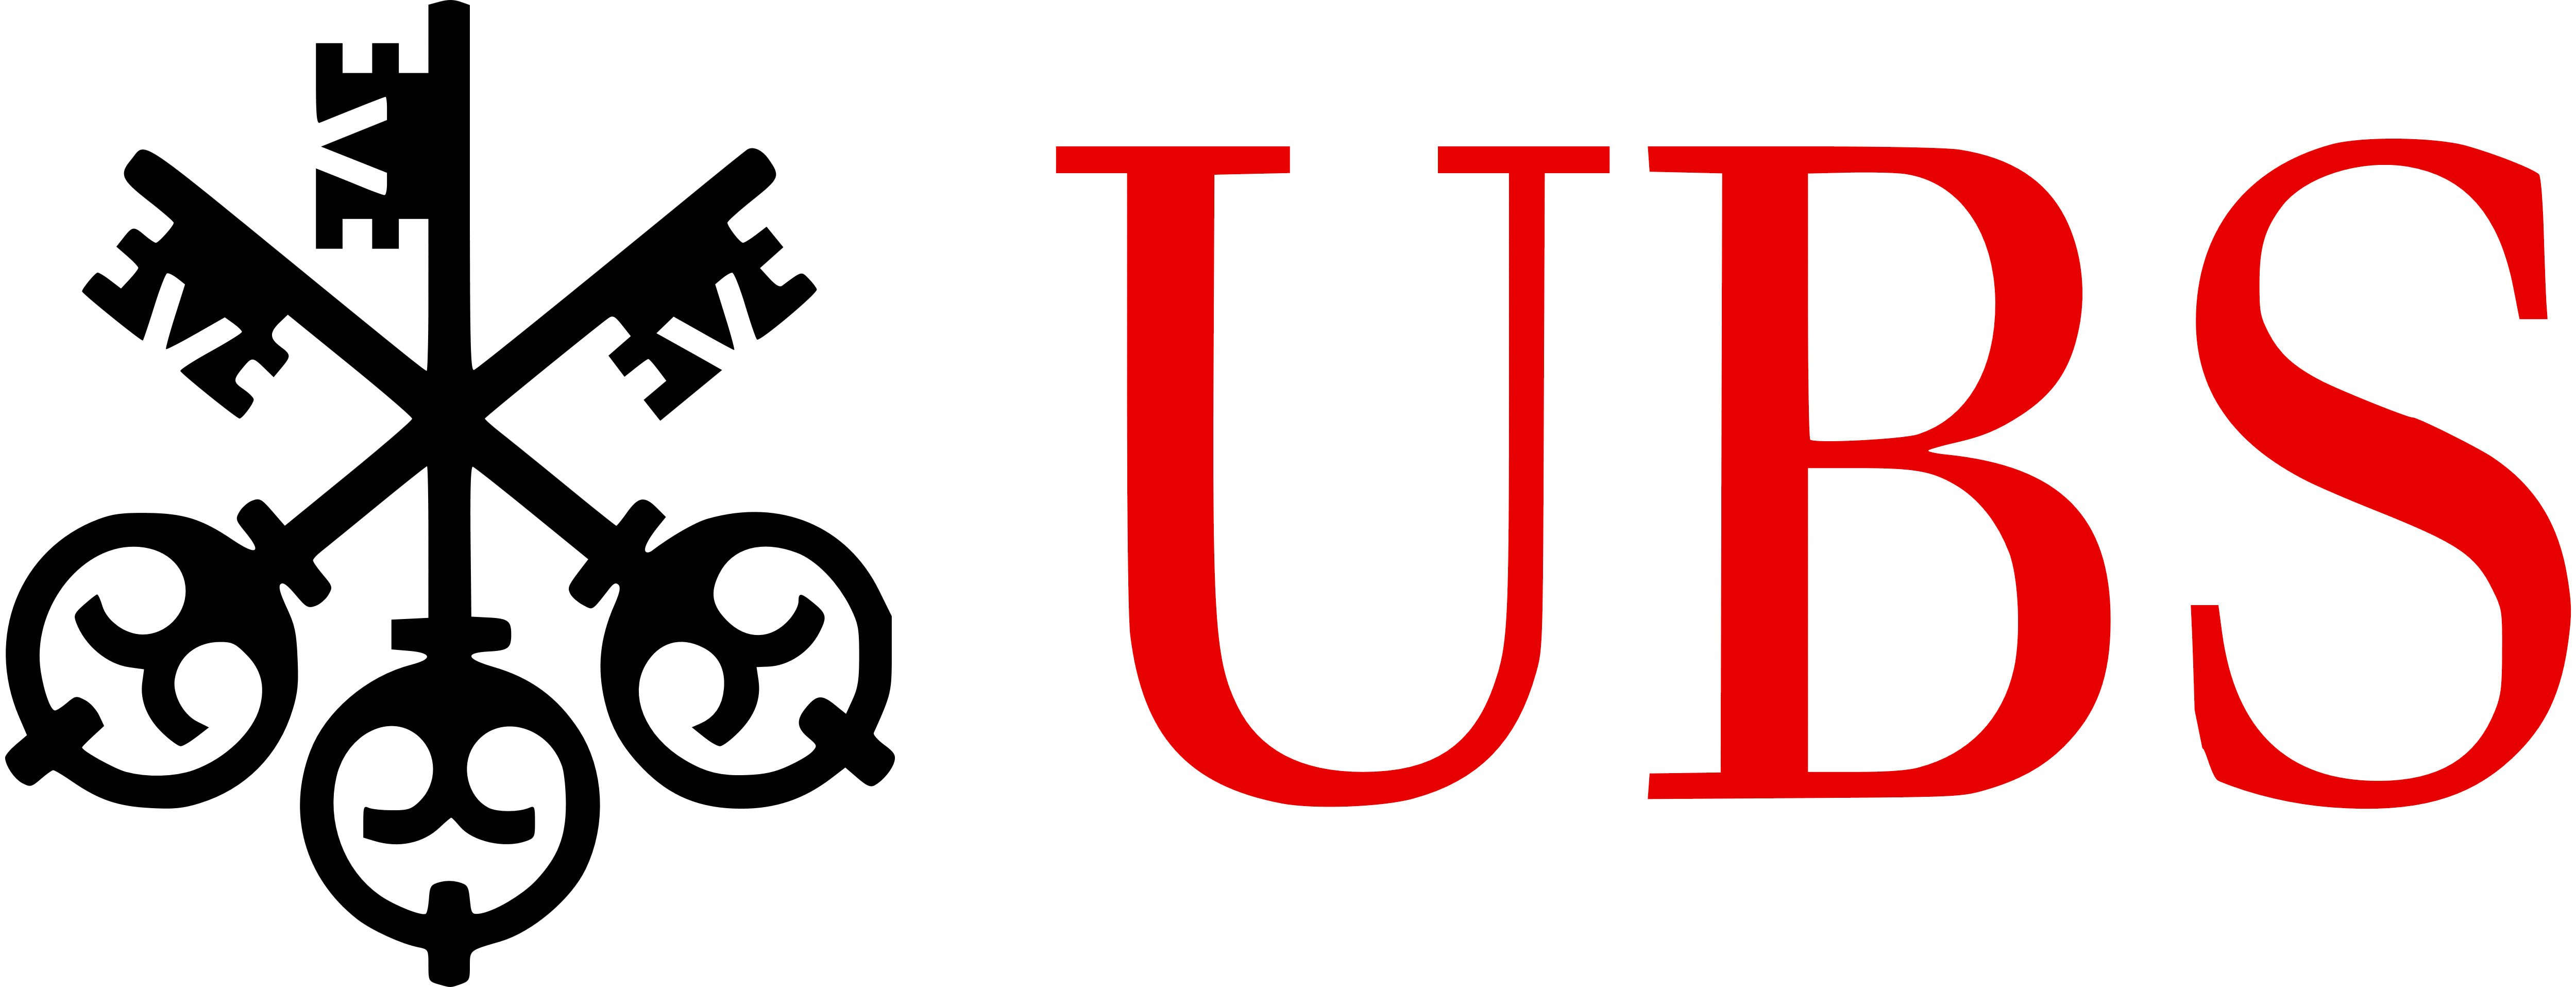 Ubs - Ubs, Transparent background PNG HD thumbnail